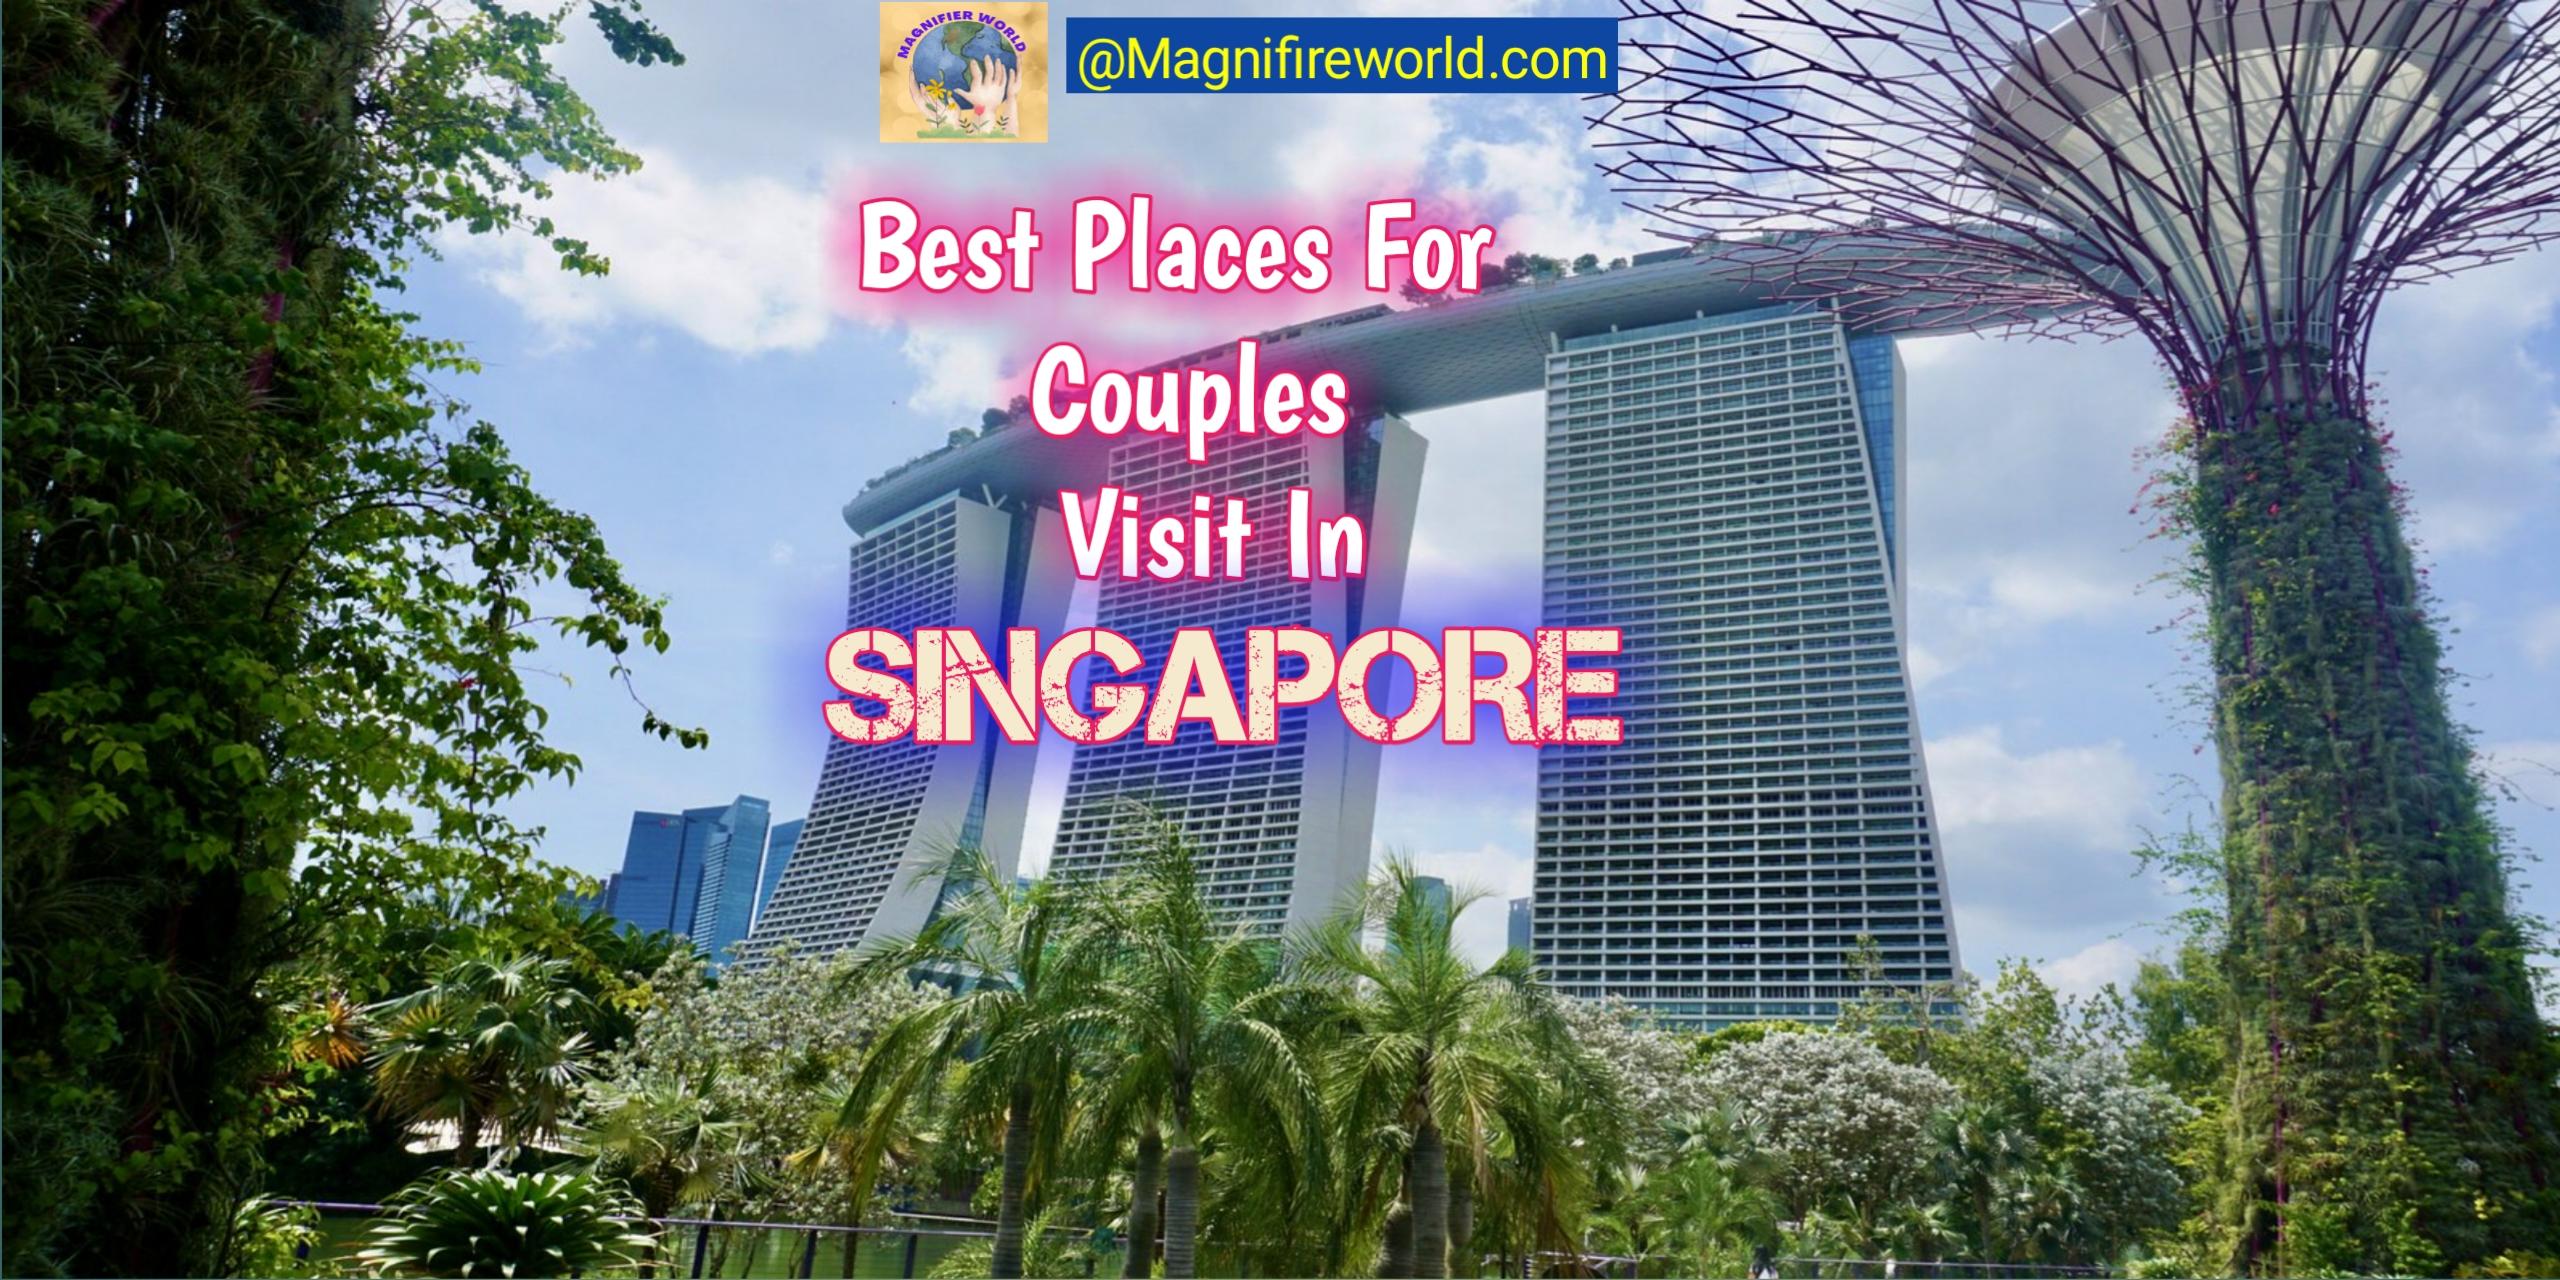 Best places for couples to visit in Singapore